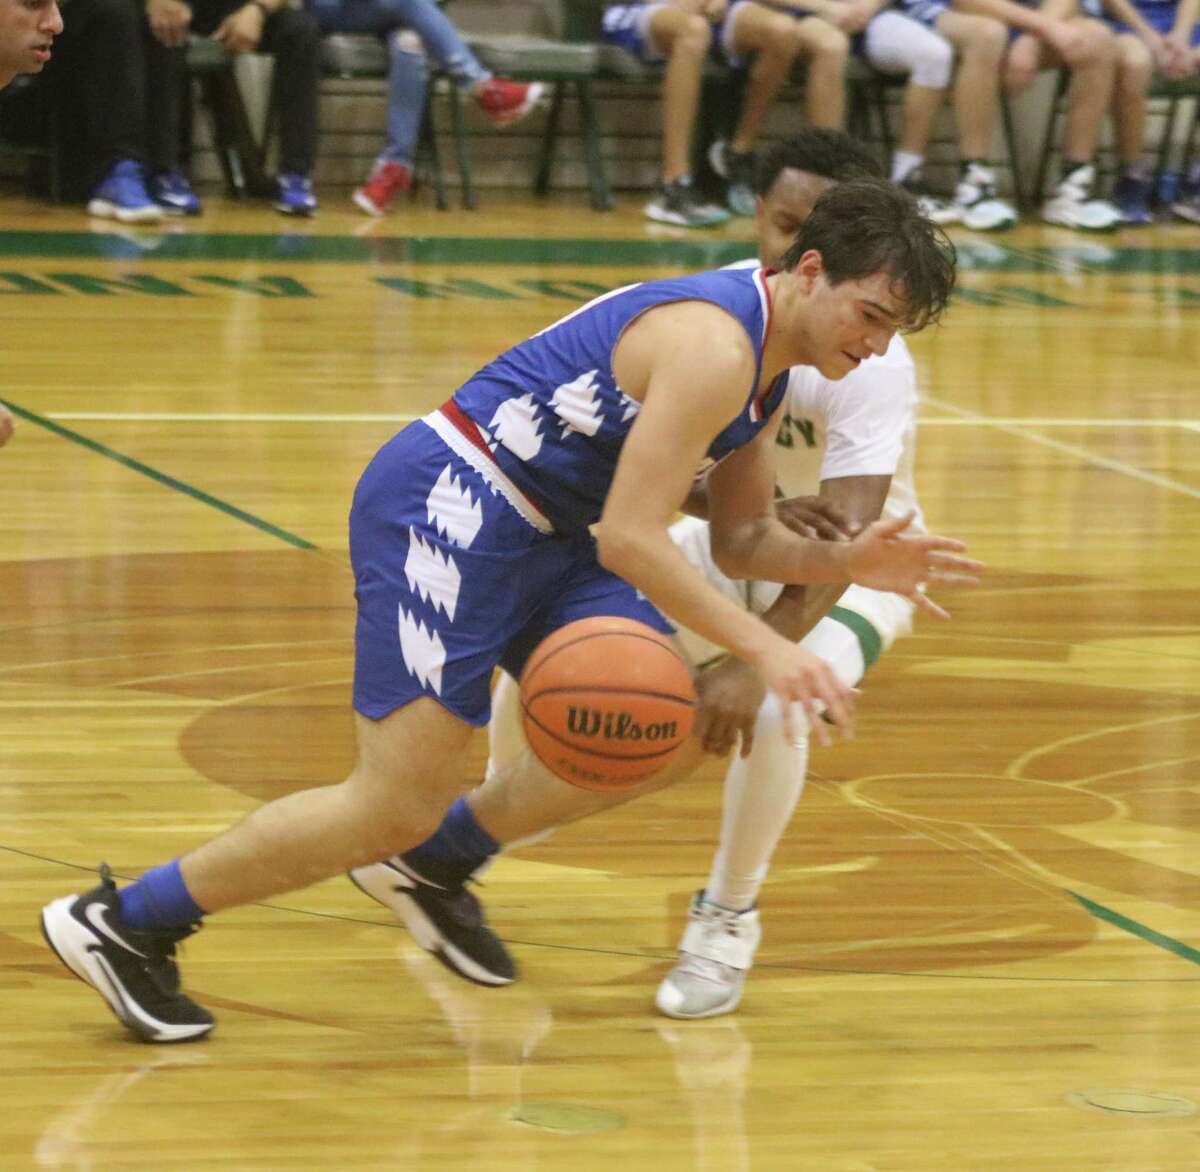 Pasadena-First Baptist player Matthew Ybarra tries to hurry the ball down the floor while a Legacy player looks for the steal In Beaumont Tuesday night.